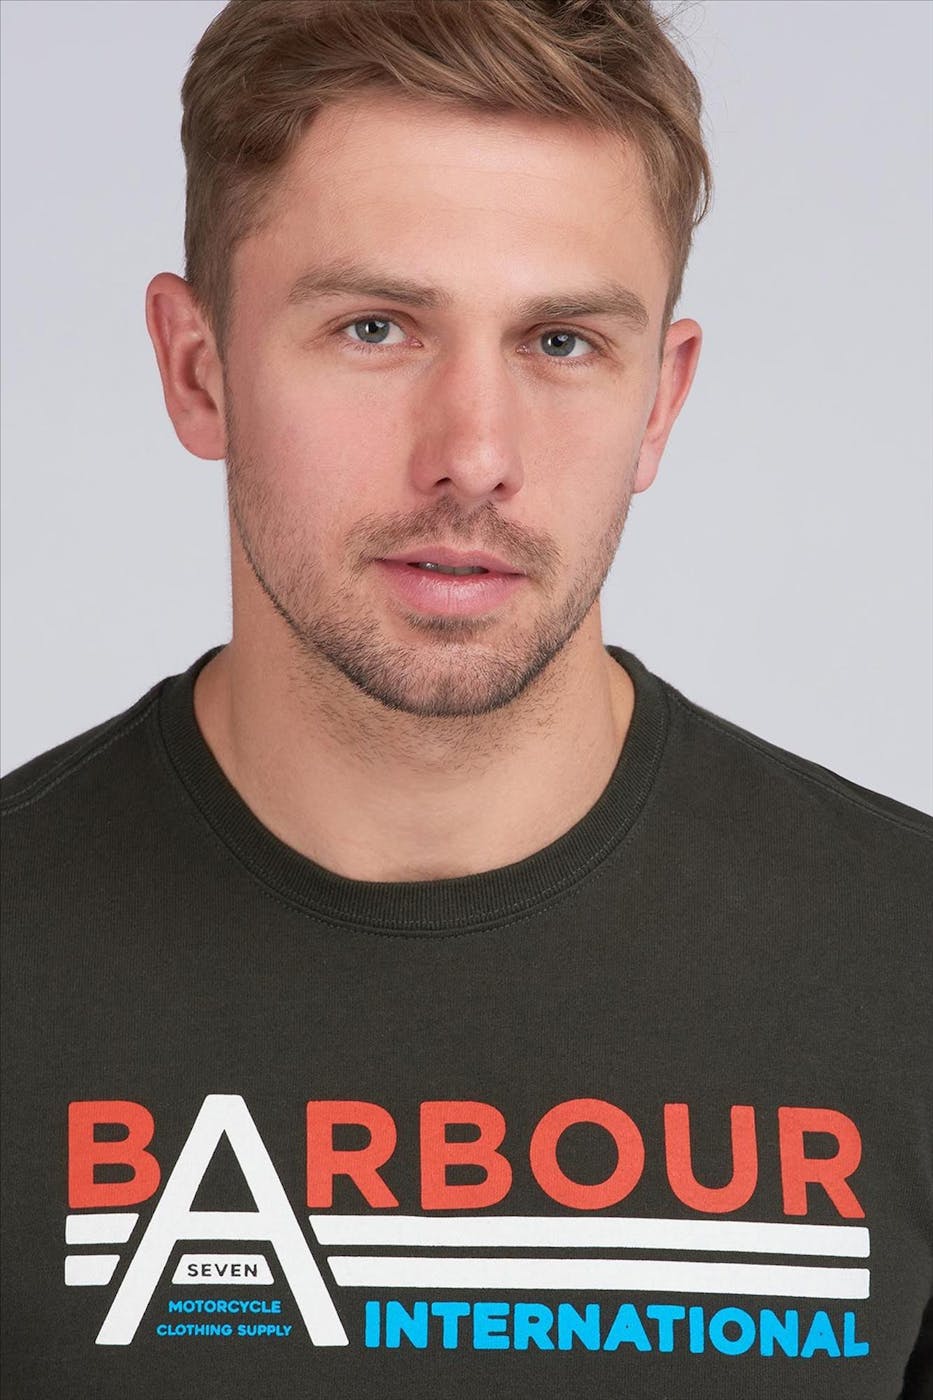 Barbour - Donkergroene Legacy A7 T-shirt